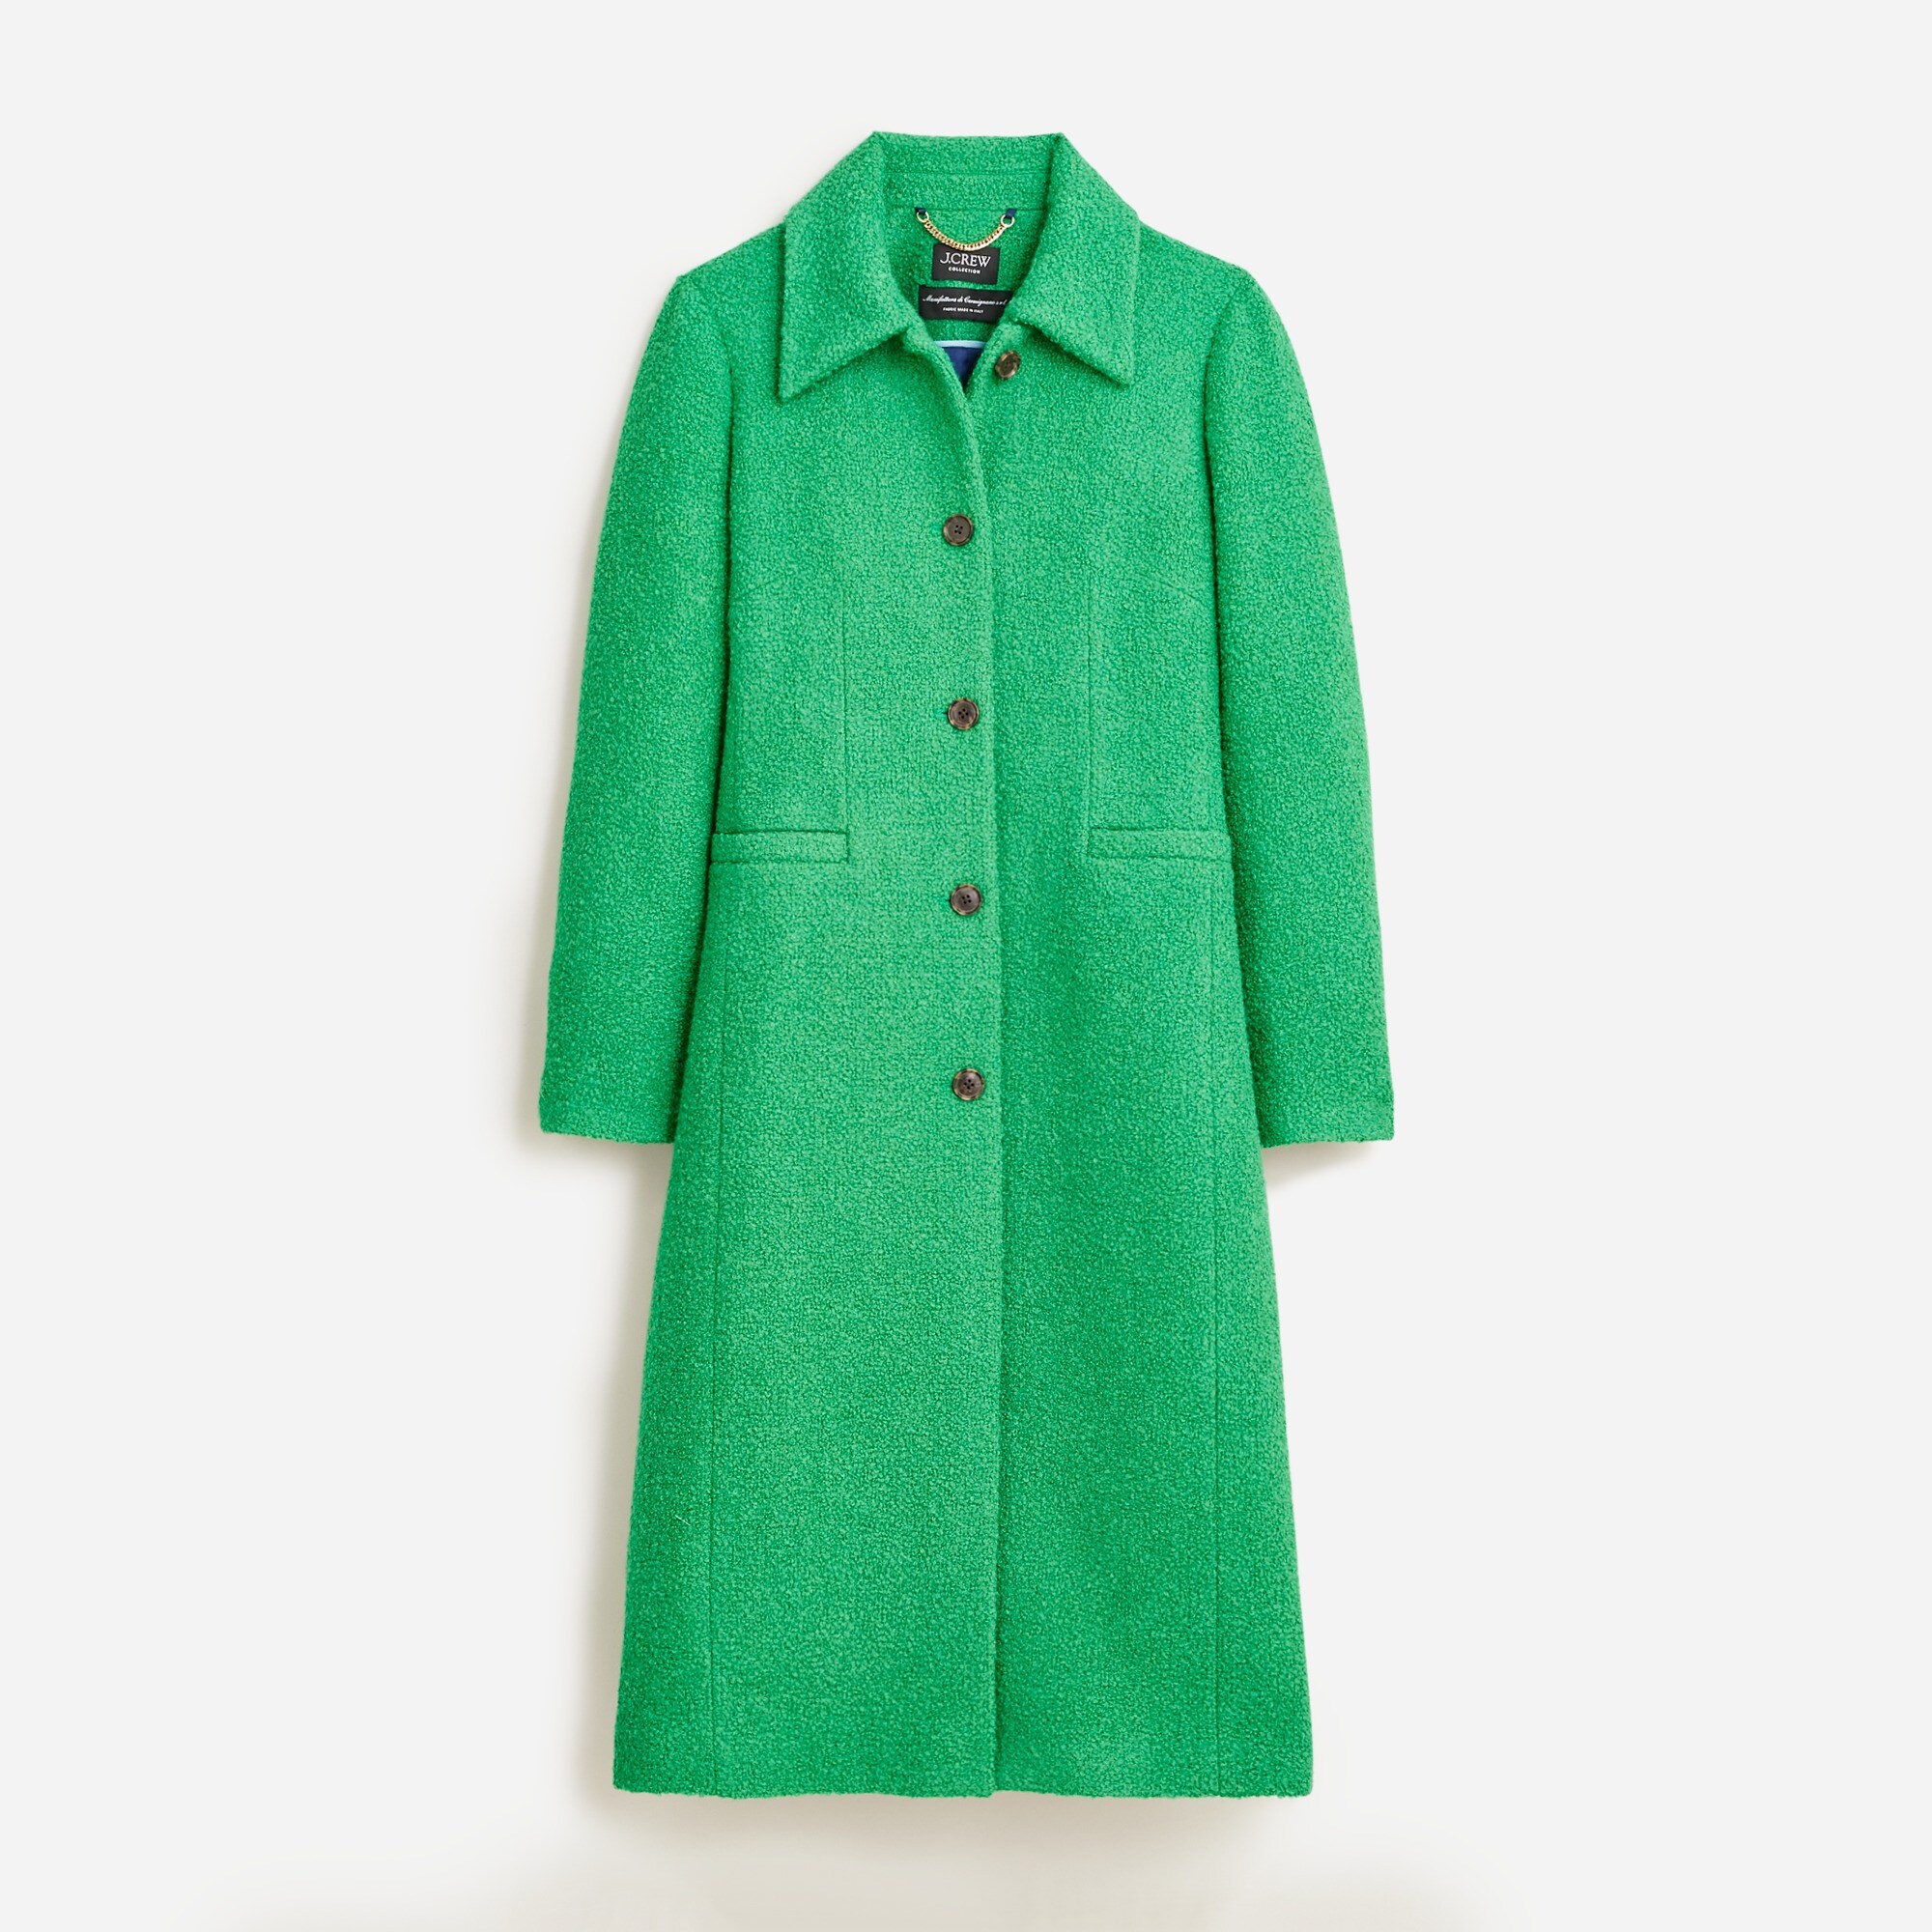  Collection A-line topcoat in Italian wool-boucl&eacute; blend